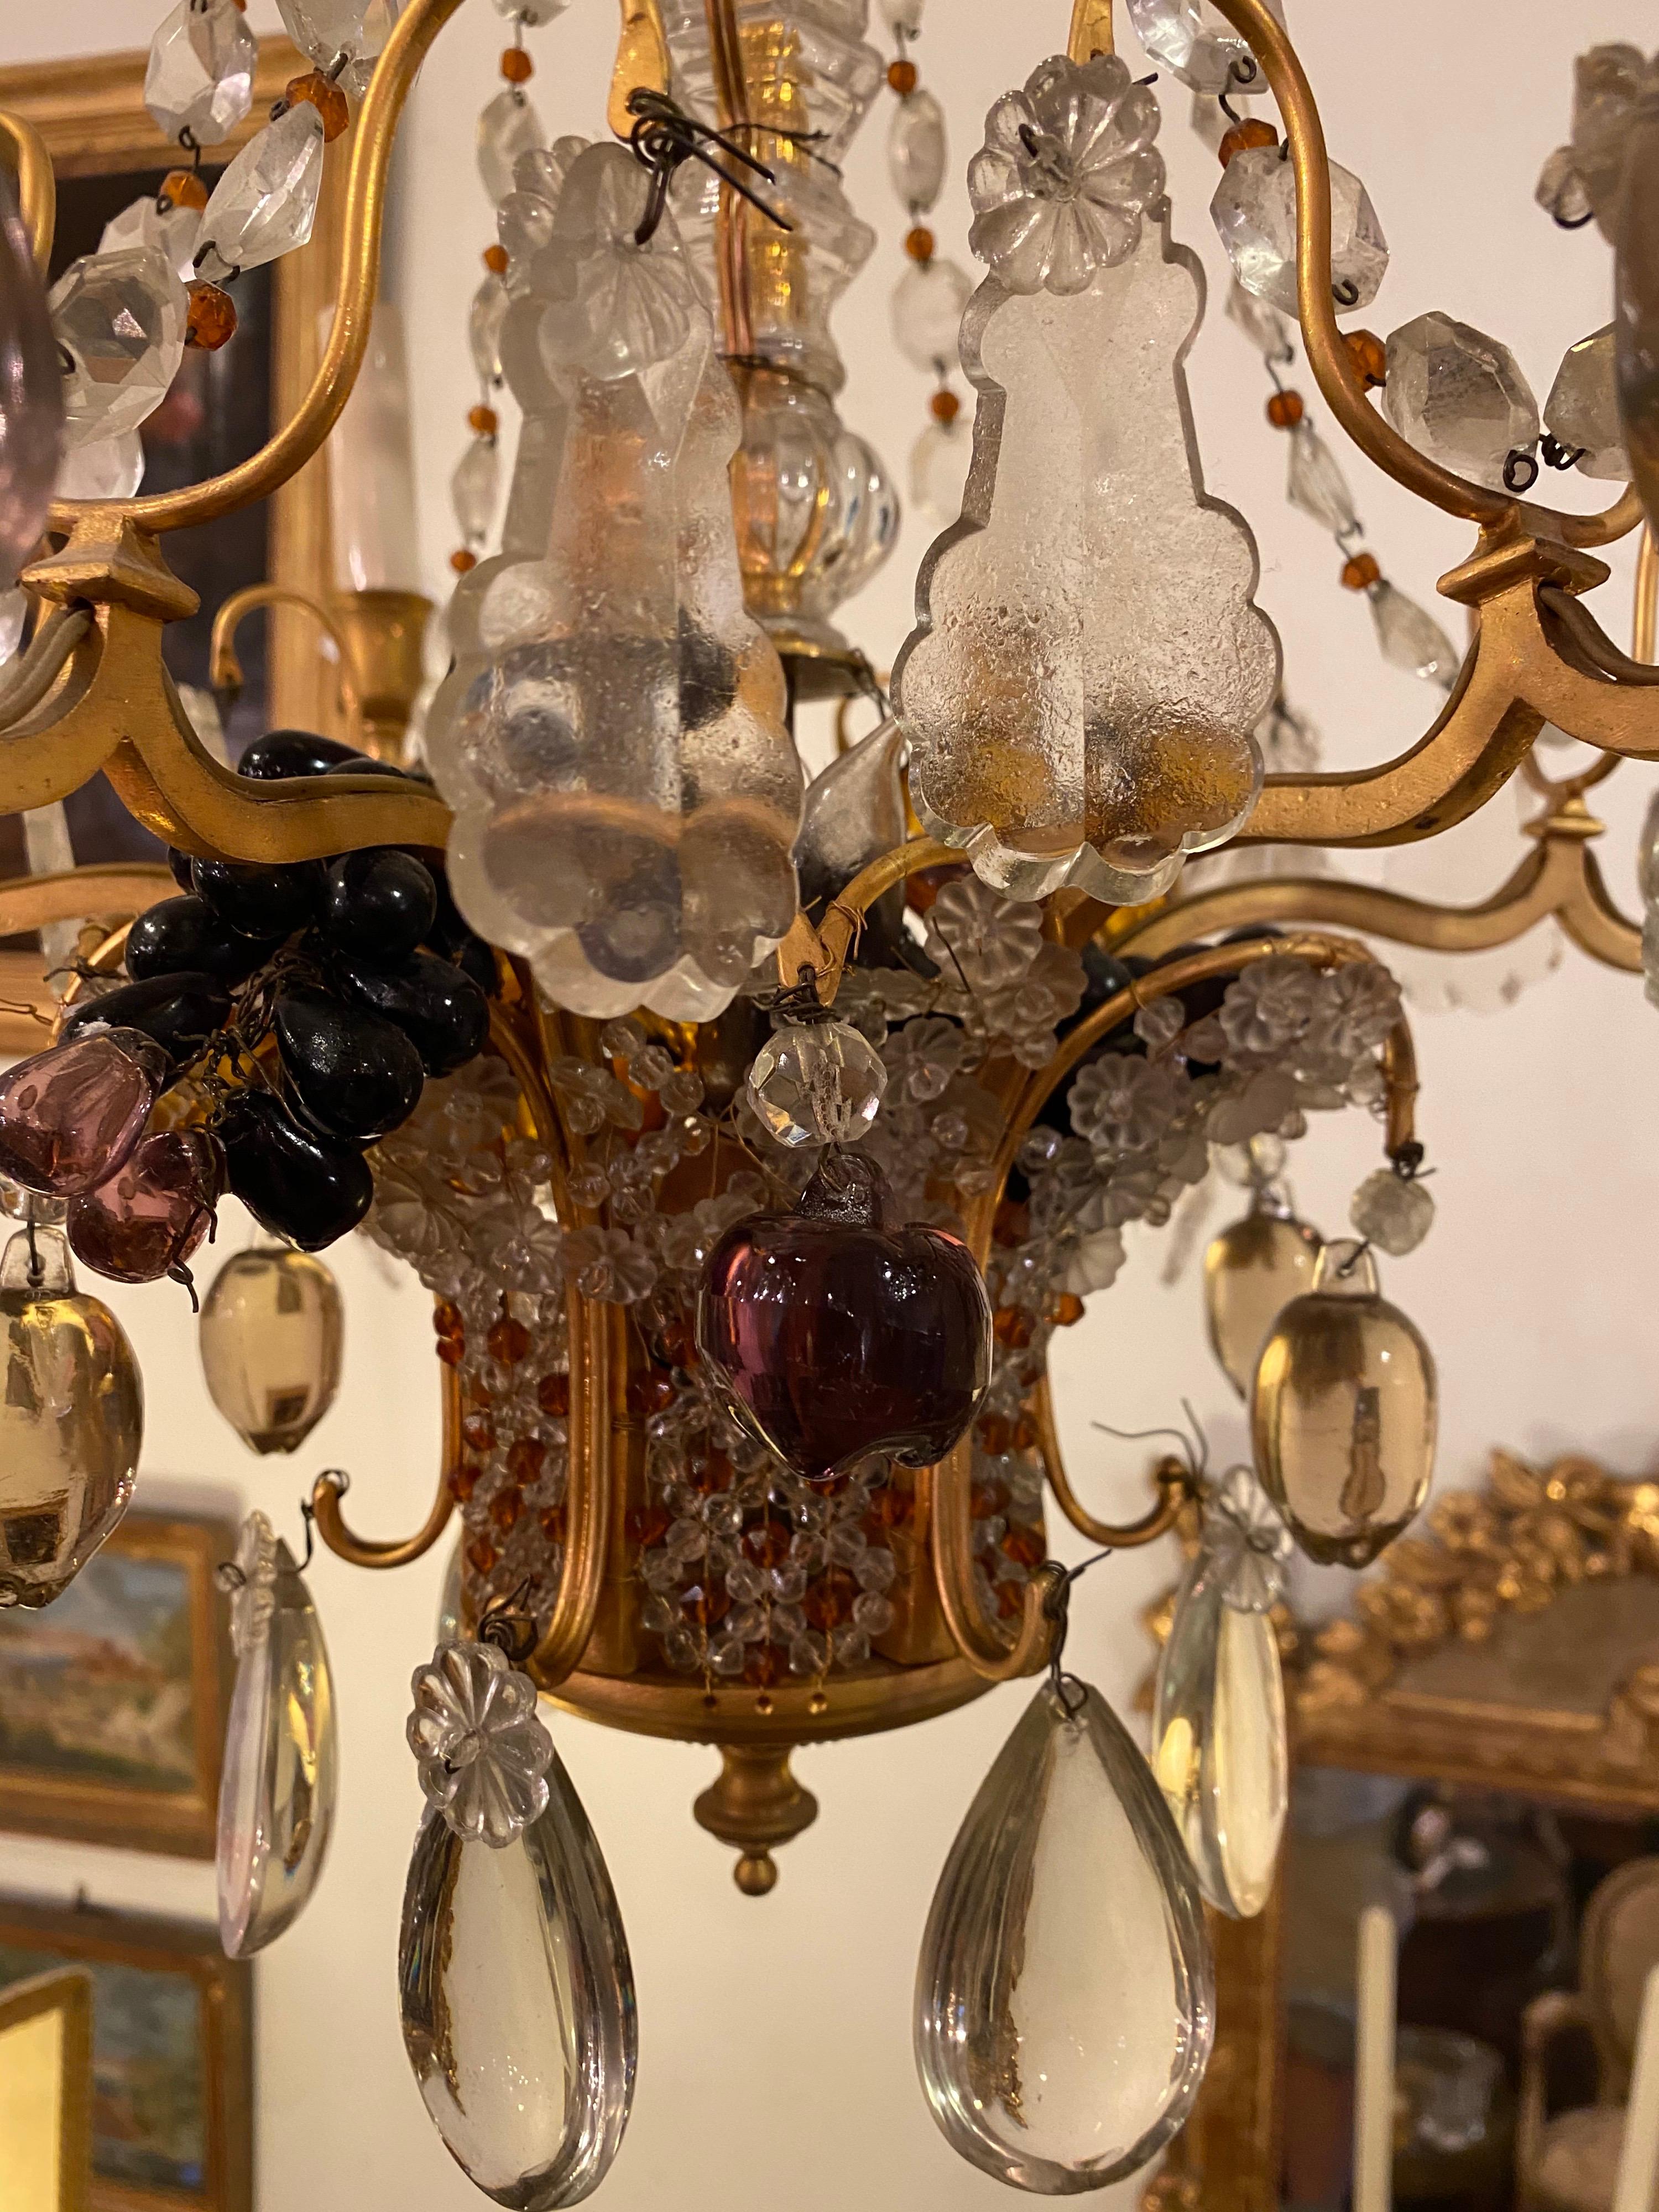 French gilt bronze “fruit basket“ chandelier with amethyst and amber glass grapes, apples and beads with crystal beading and drops.